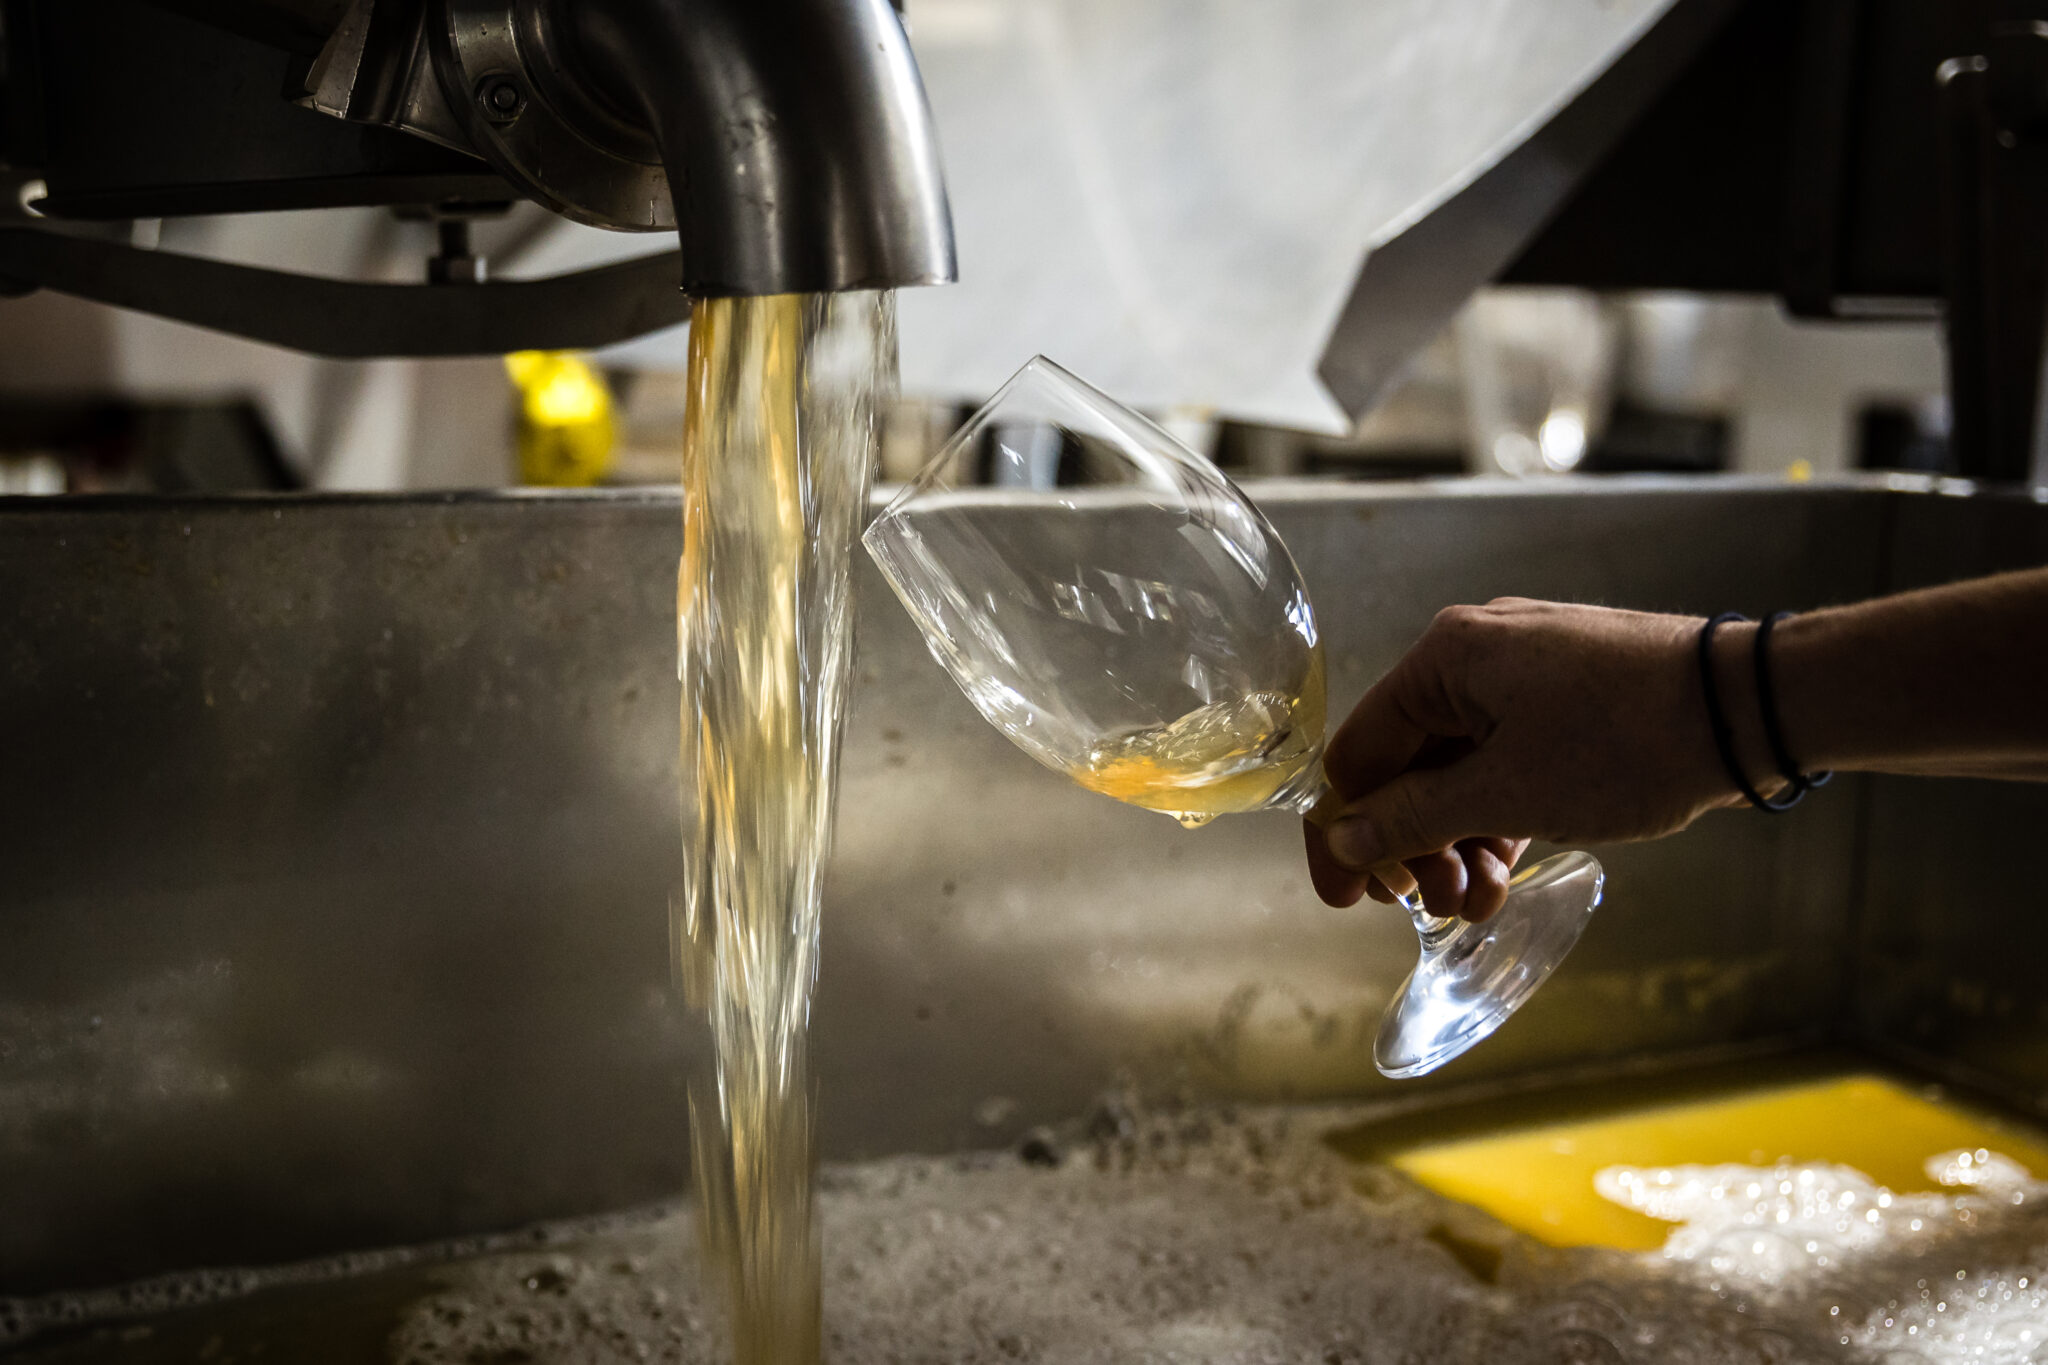 A glass ready to catch wine being poured during the wine-making process